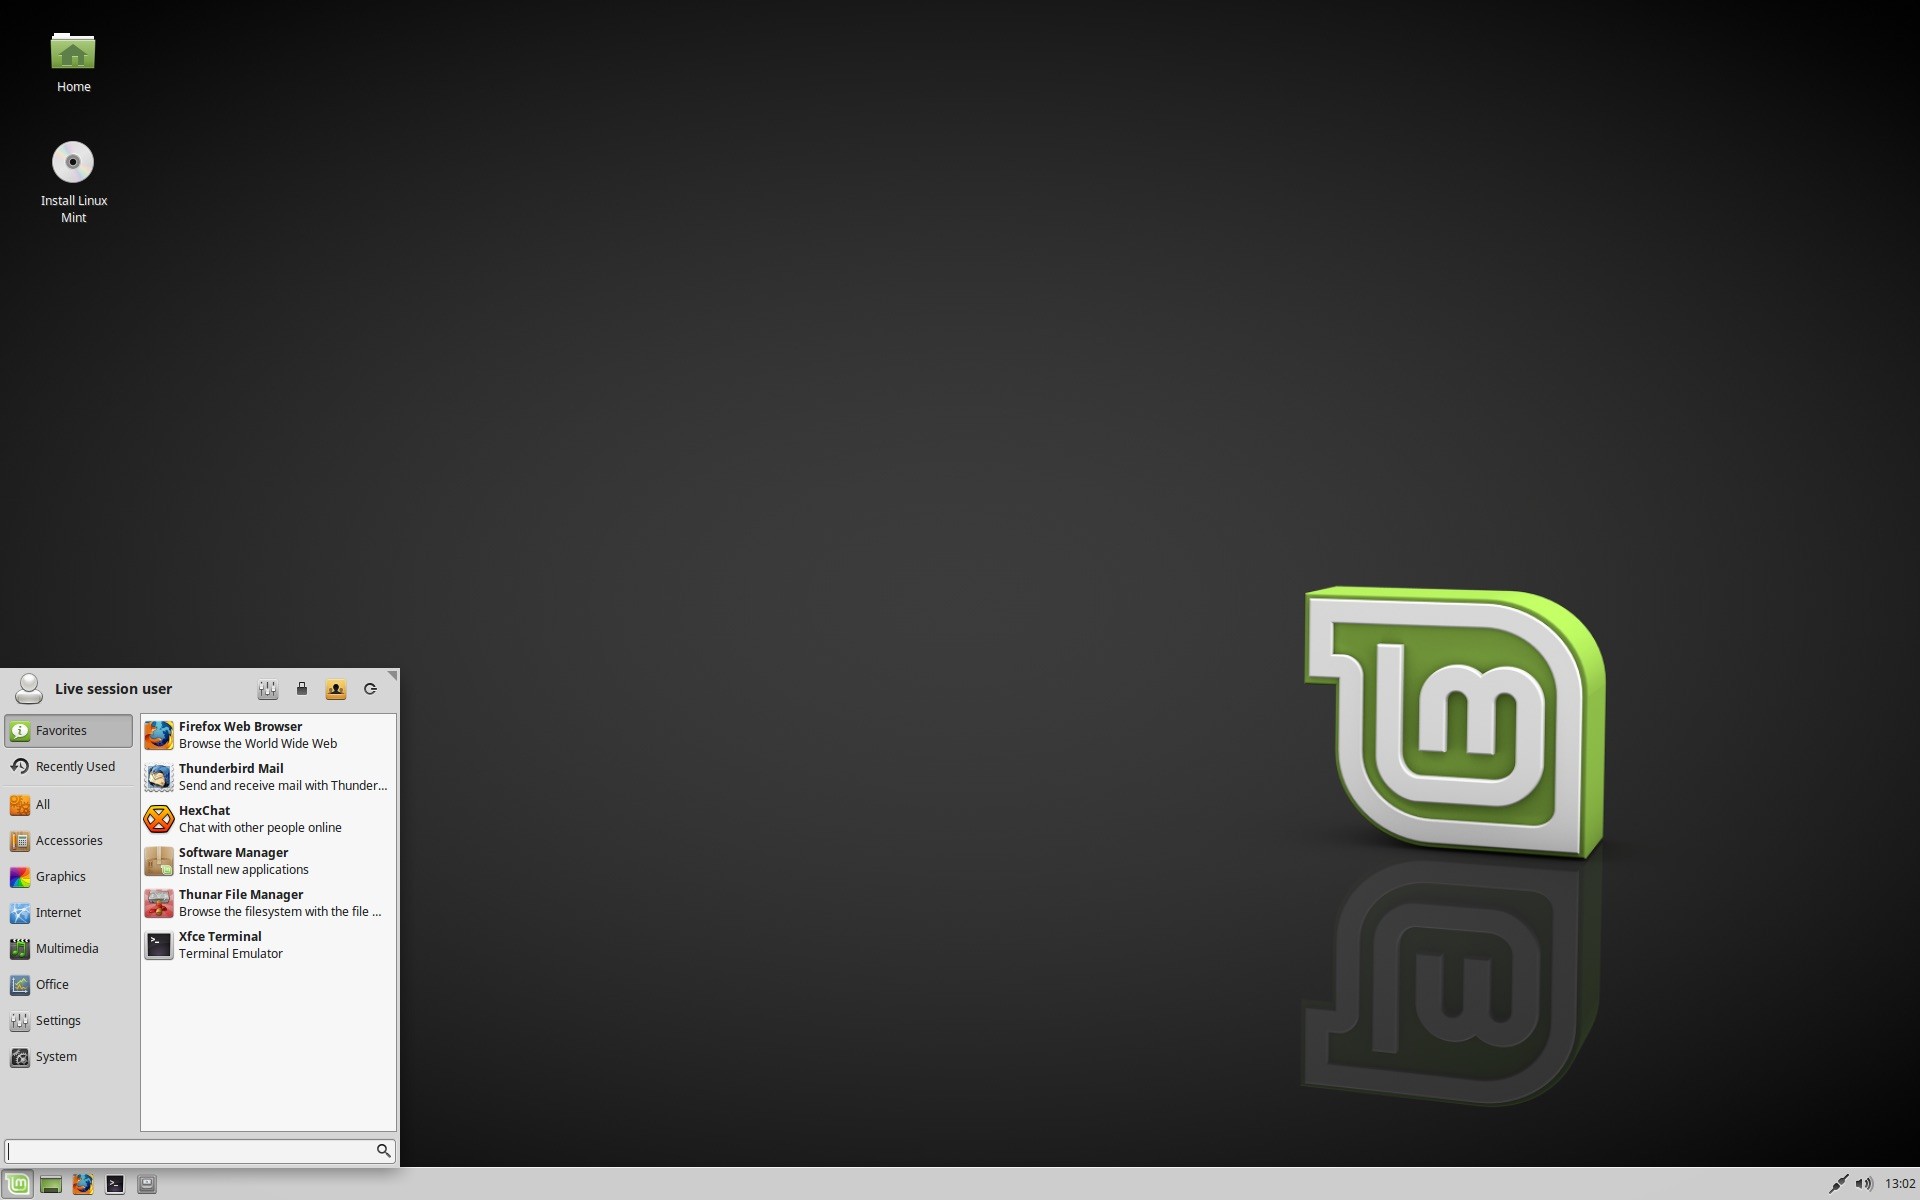 linux-mint-18-3-sylvia-kde-and-xfce-beta-editions-now-available-for-download-518801-3.jpg